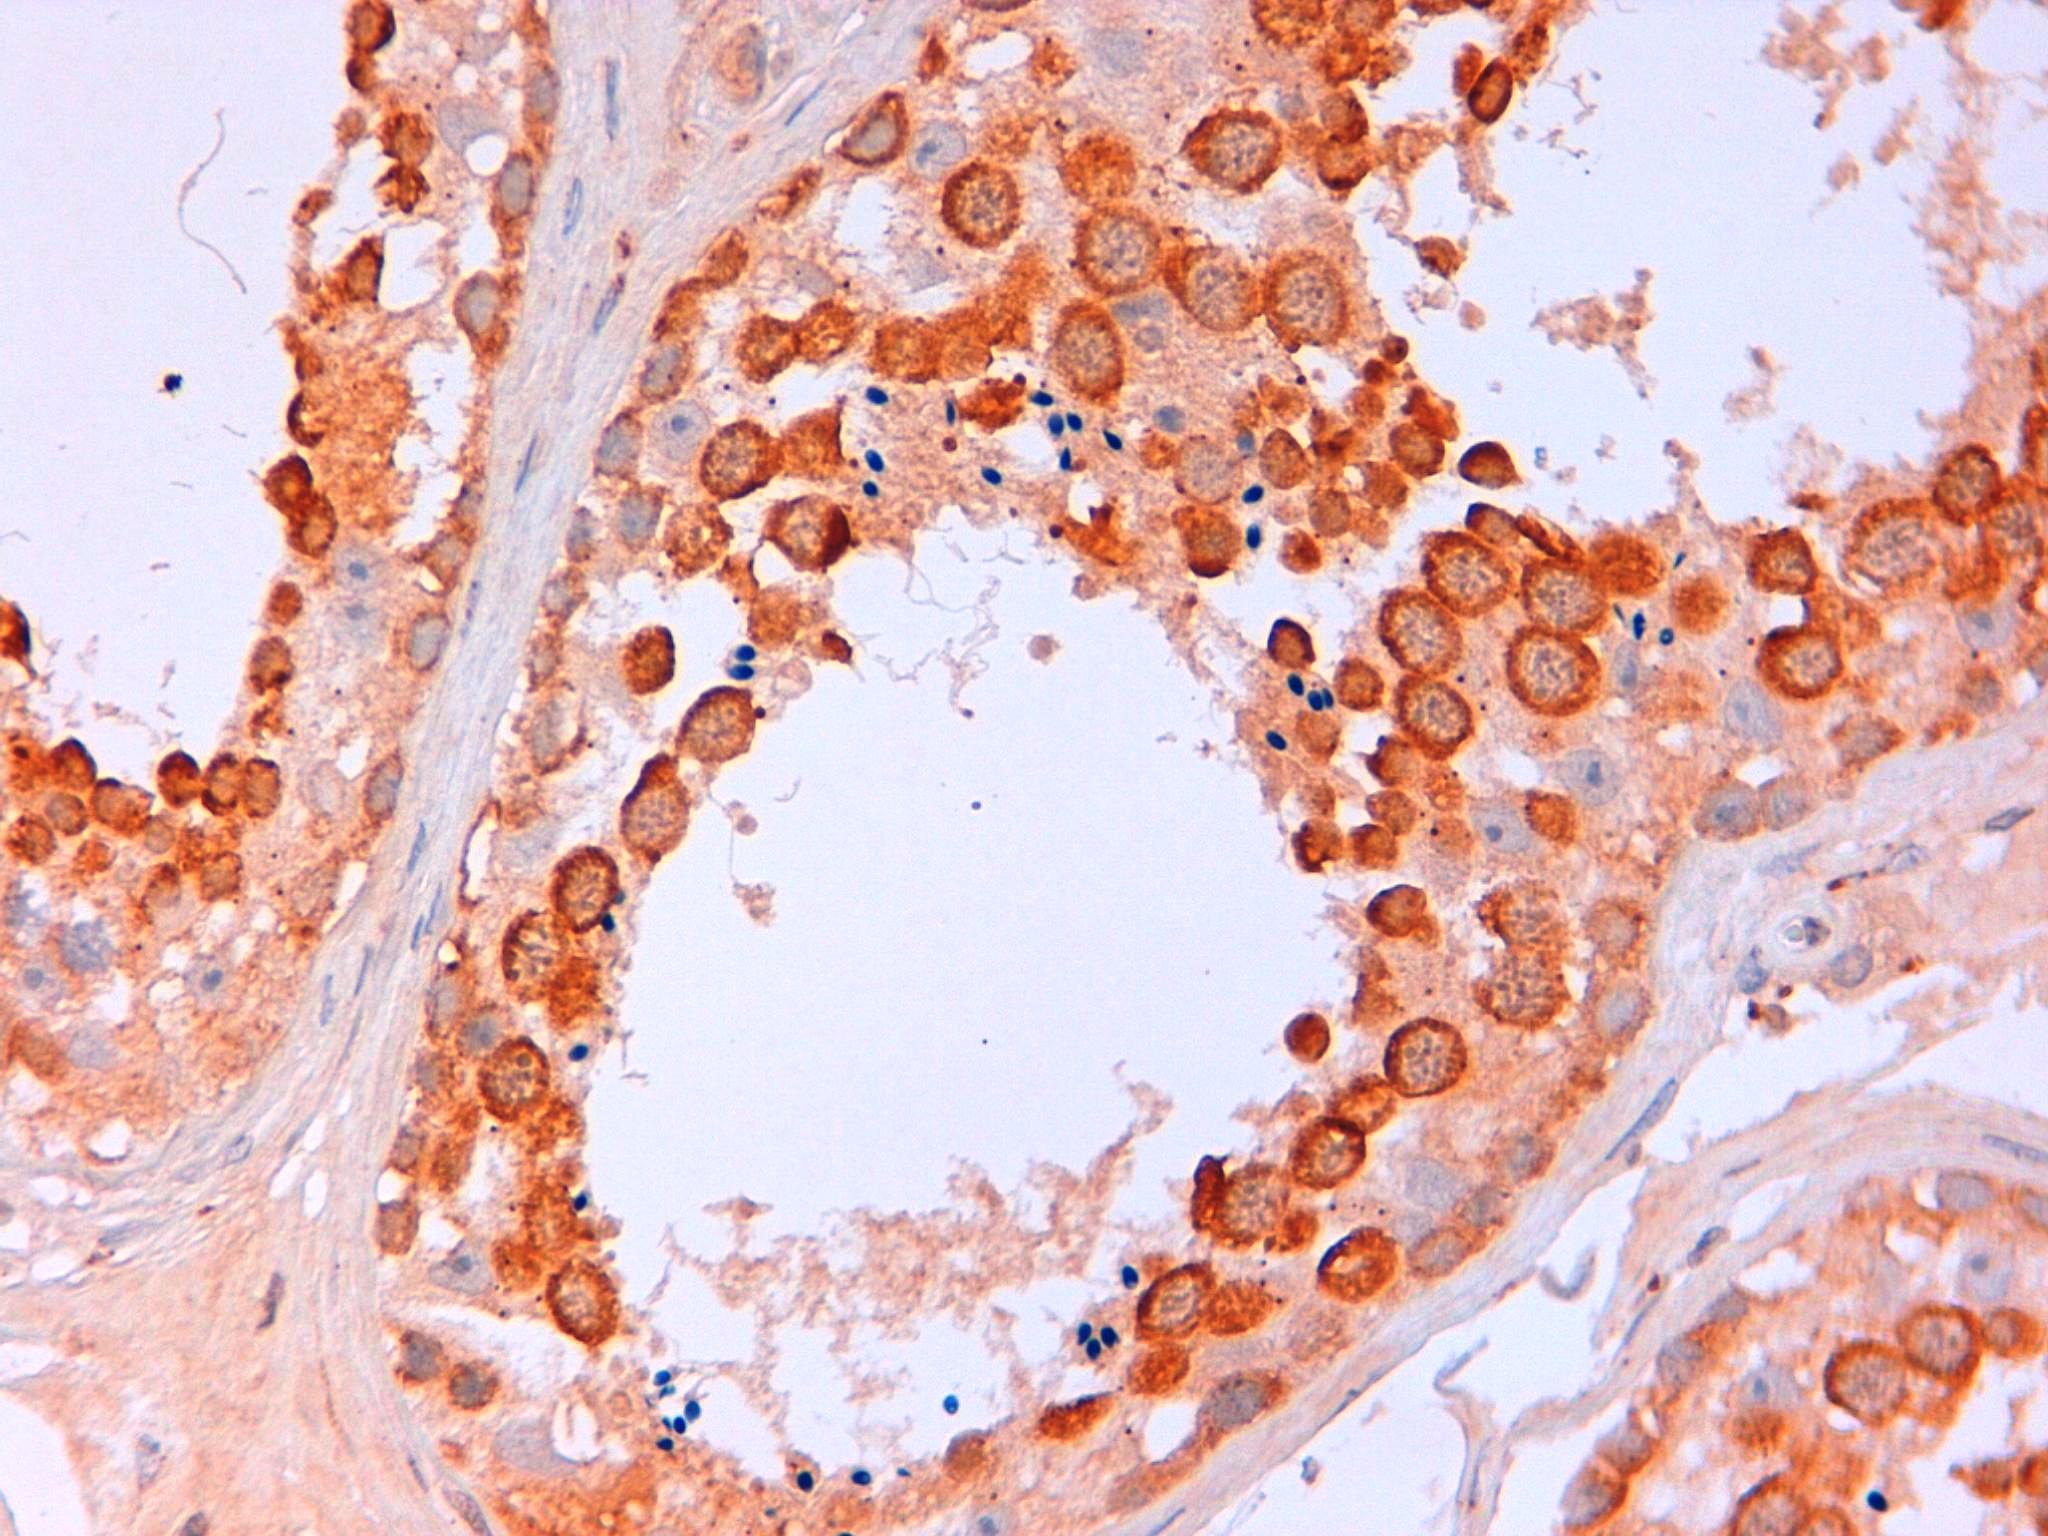 Immunohistochemical staining of FFPE human testis using DDX antibody at 5 µg/ml visualized using goat anti-rabbit-HRP secondary and DAB substrate at pH 6.2.  Pathologist comment: Very good staining on germ cell testicular @ pH6.2, little background on tissue.